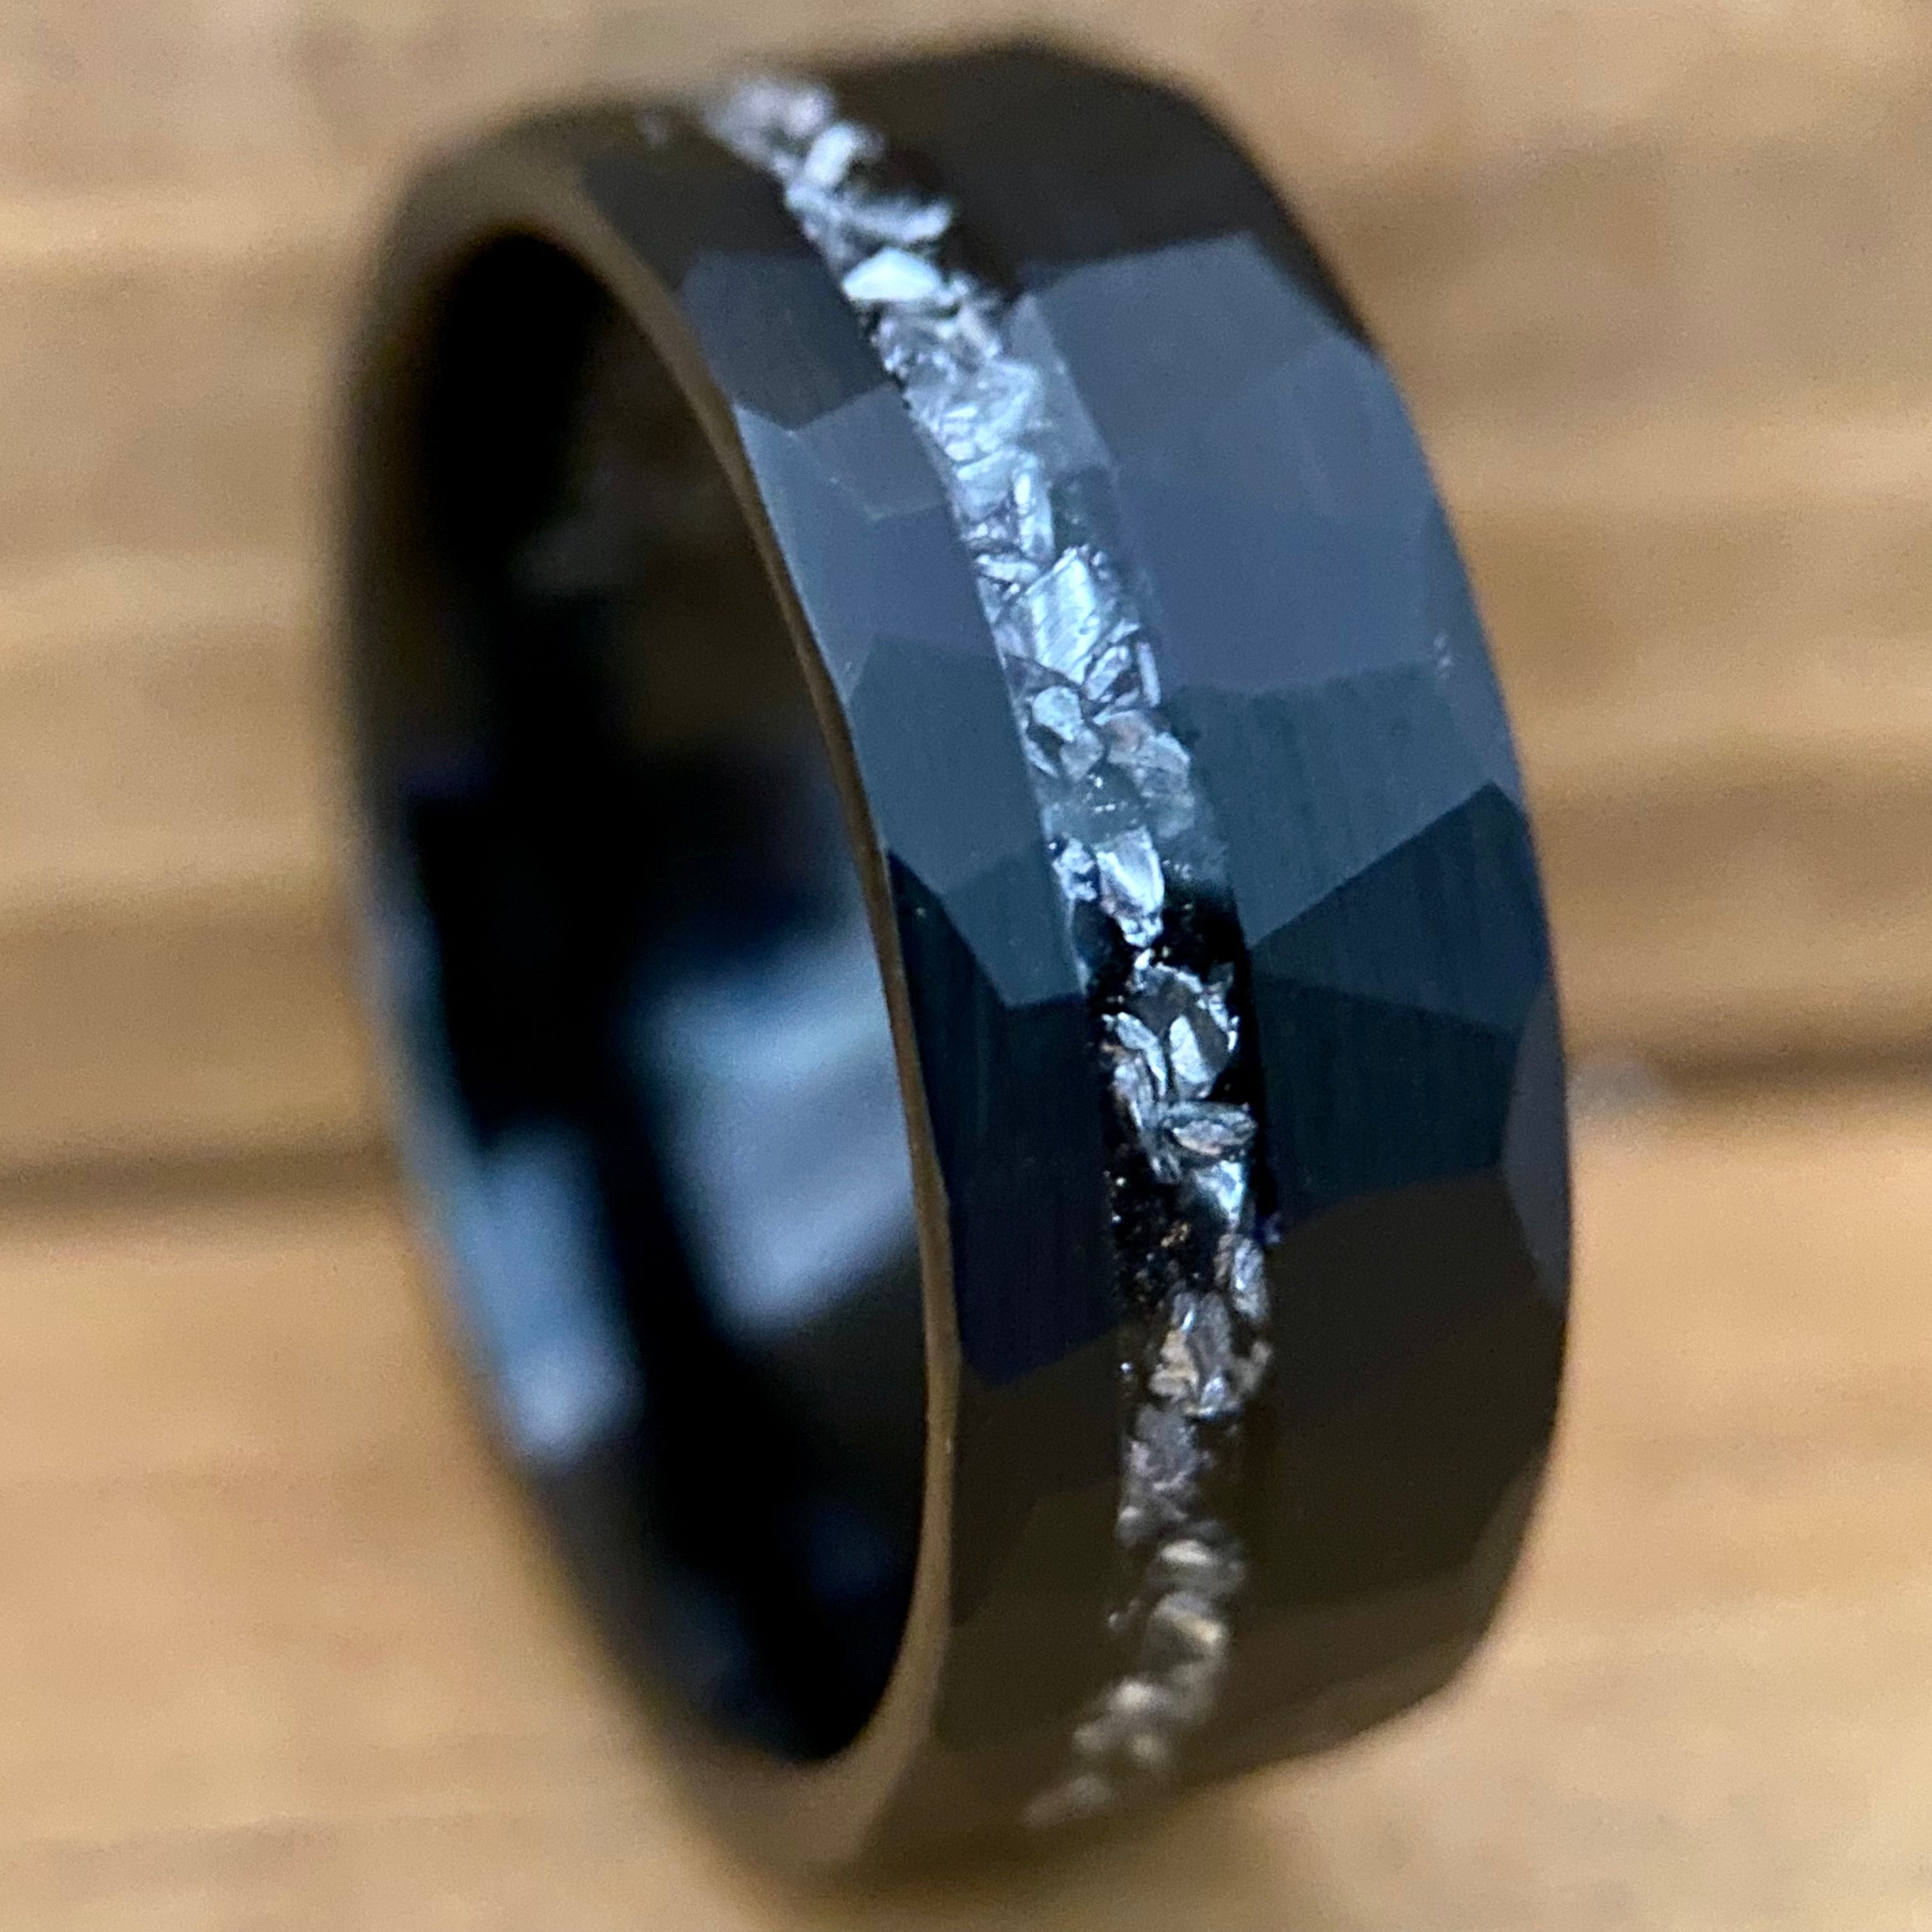 BW James Jewelers ALT Wedding Band “The Moon Lander” 8mm Black Tungsten Ring With Gibeon Meteorite